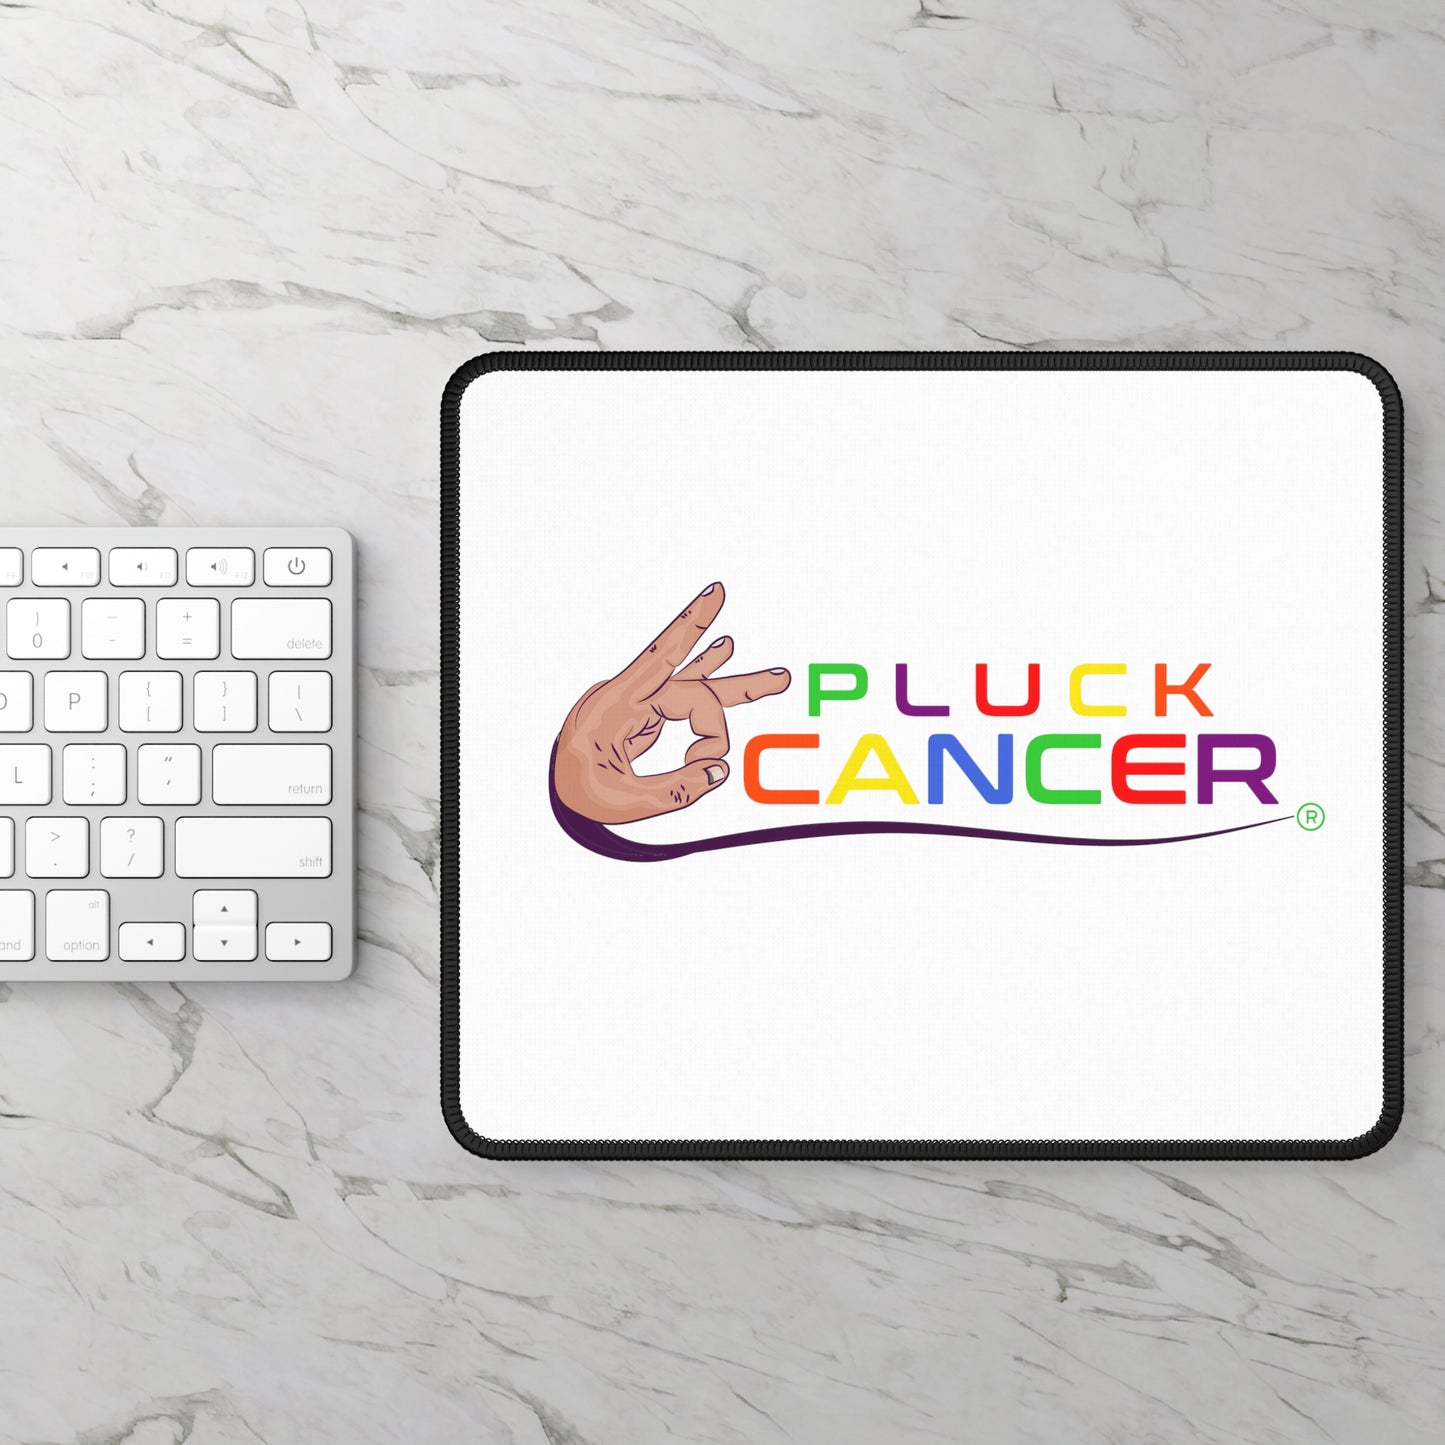 Gaming Mouse Pad-"PLUCK CANCER!"